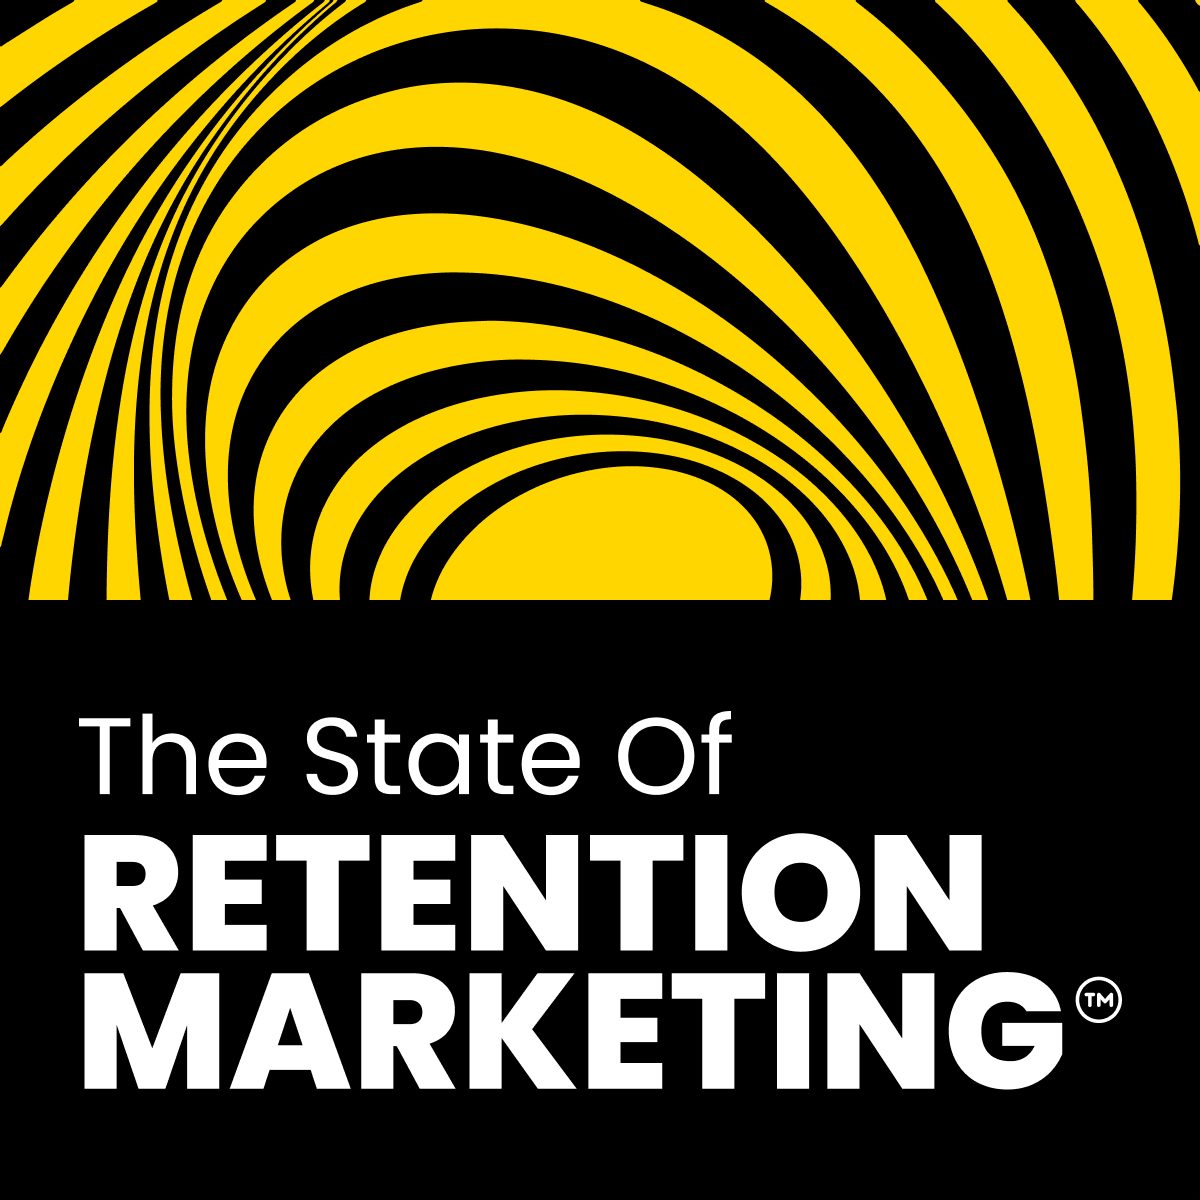 The State of Retention Marketing